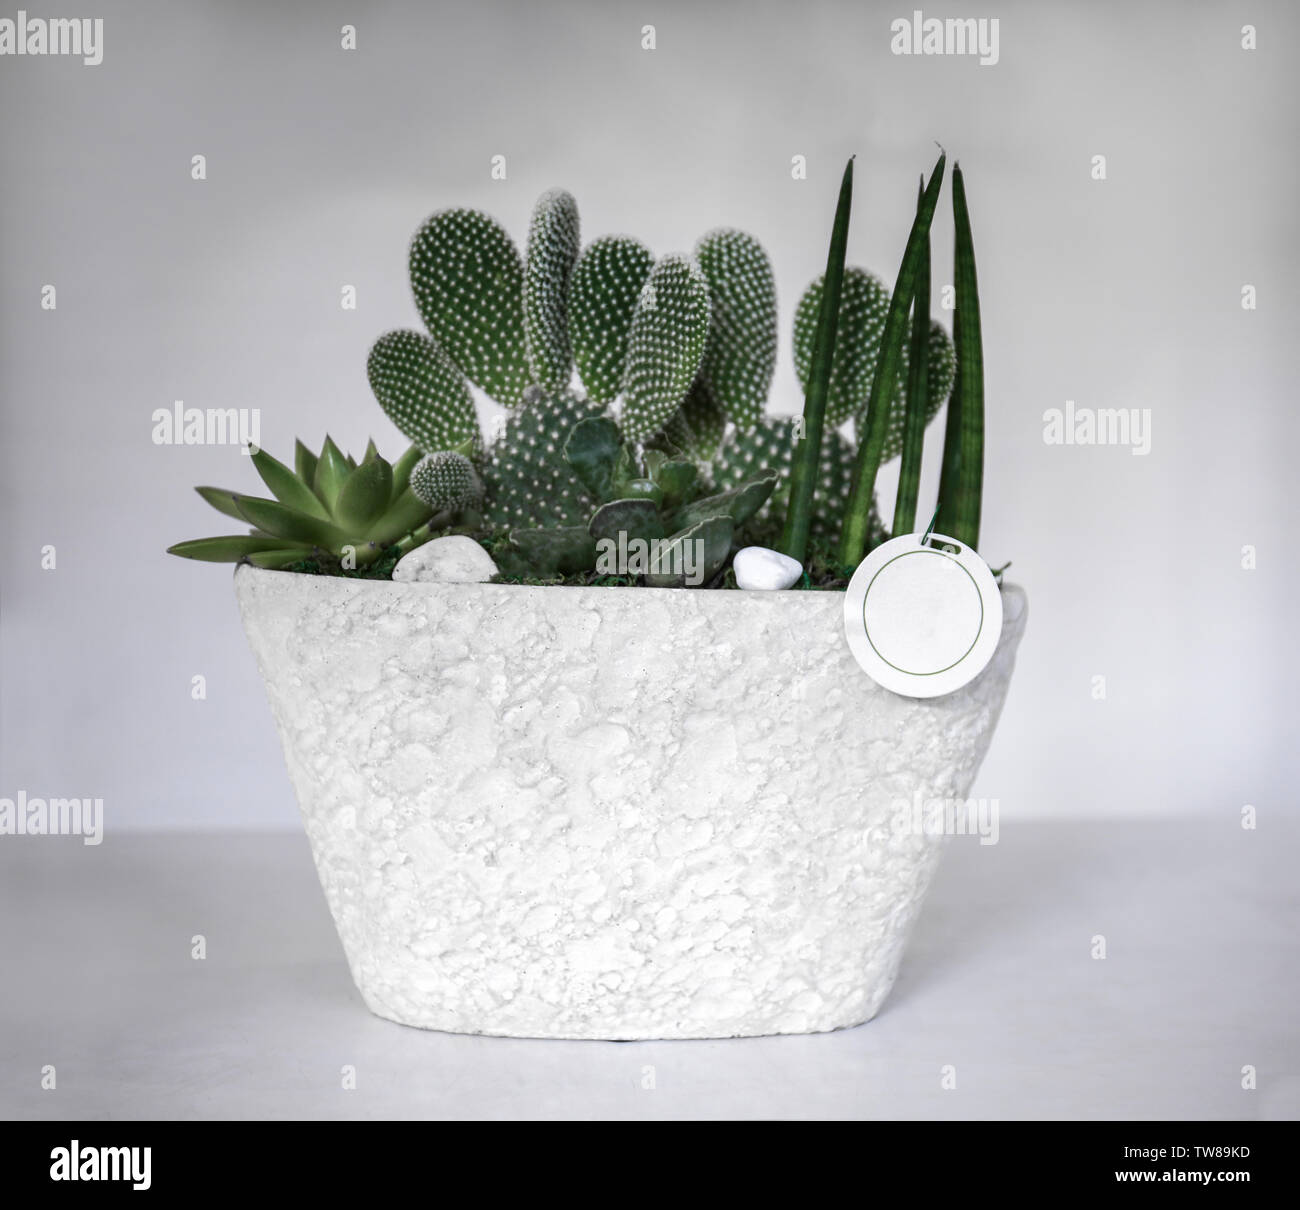 Pot with different succulents on light background Stock Photo